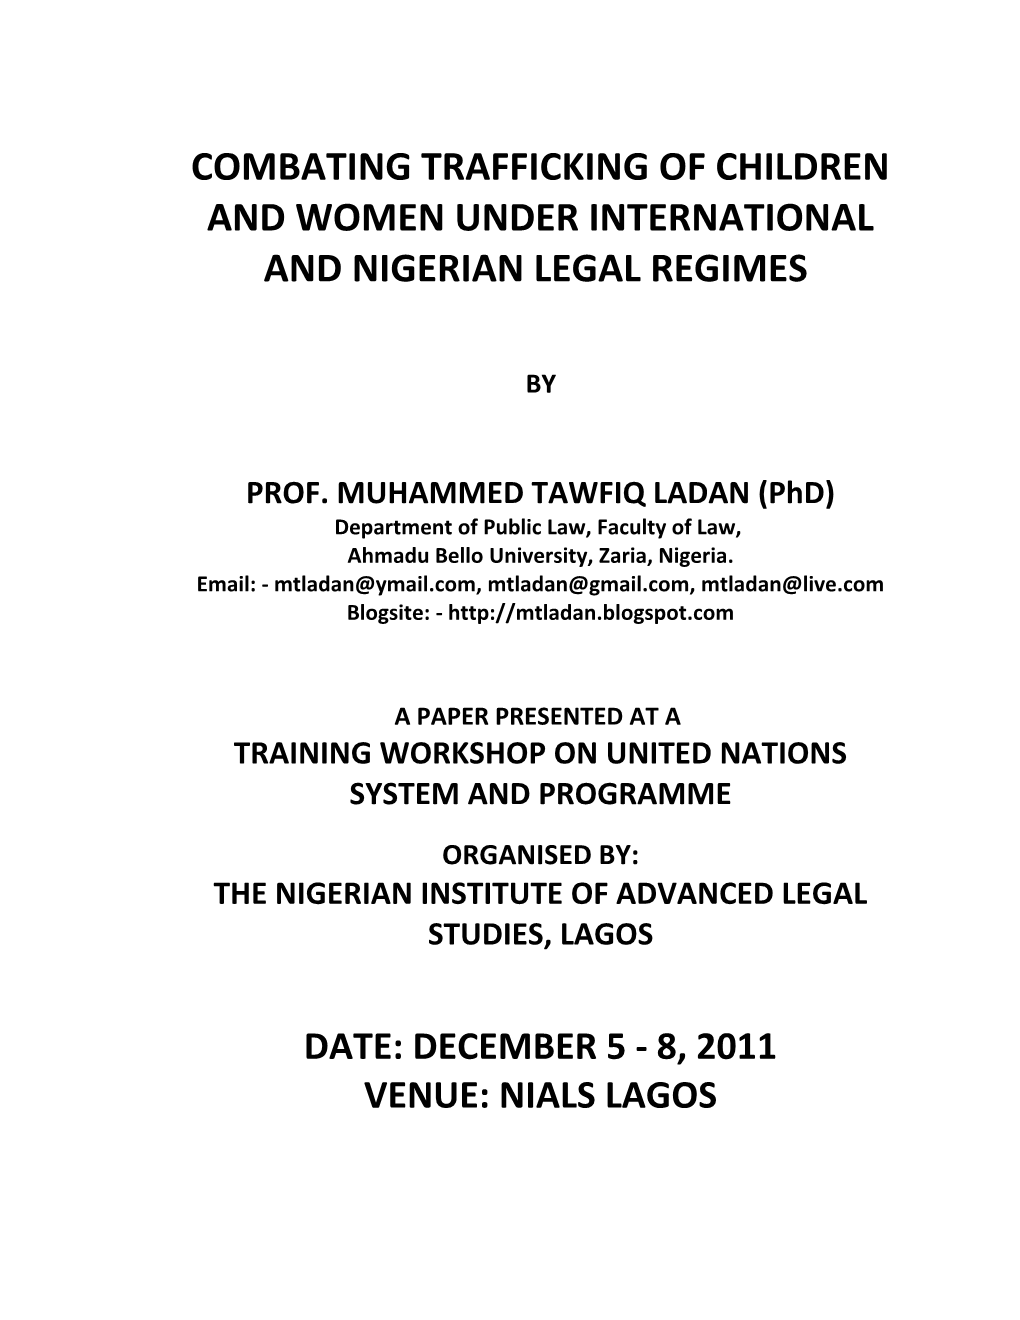 Combating Trafficking of Children and Women Under International and Nigerian Legal Regimes